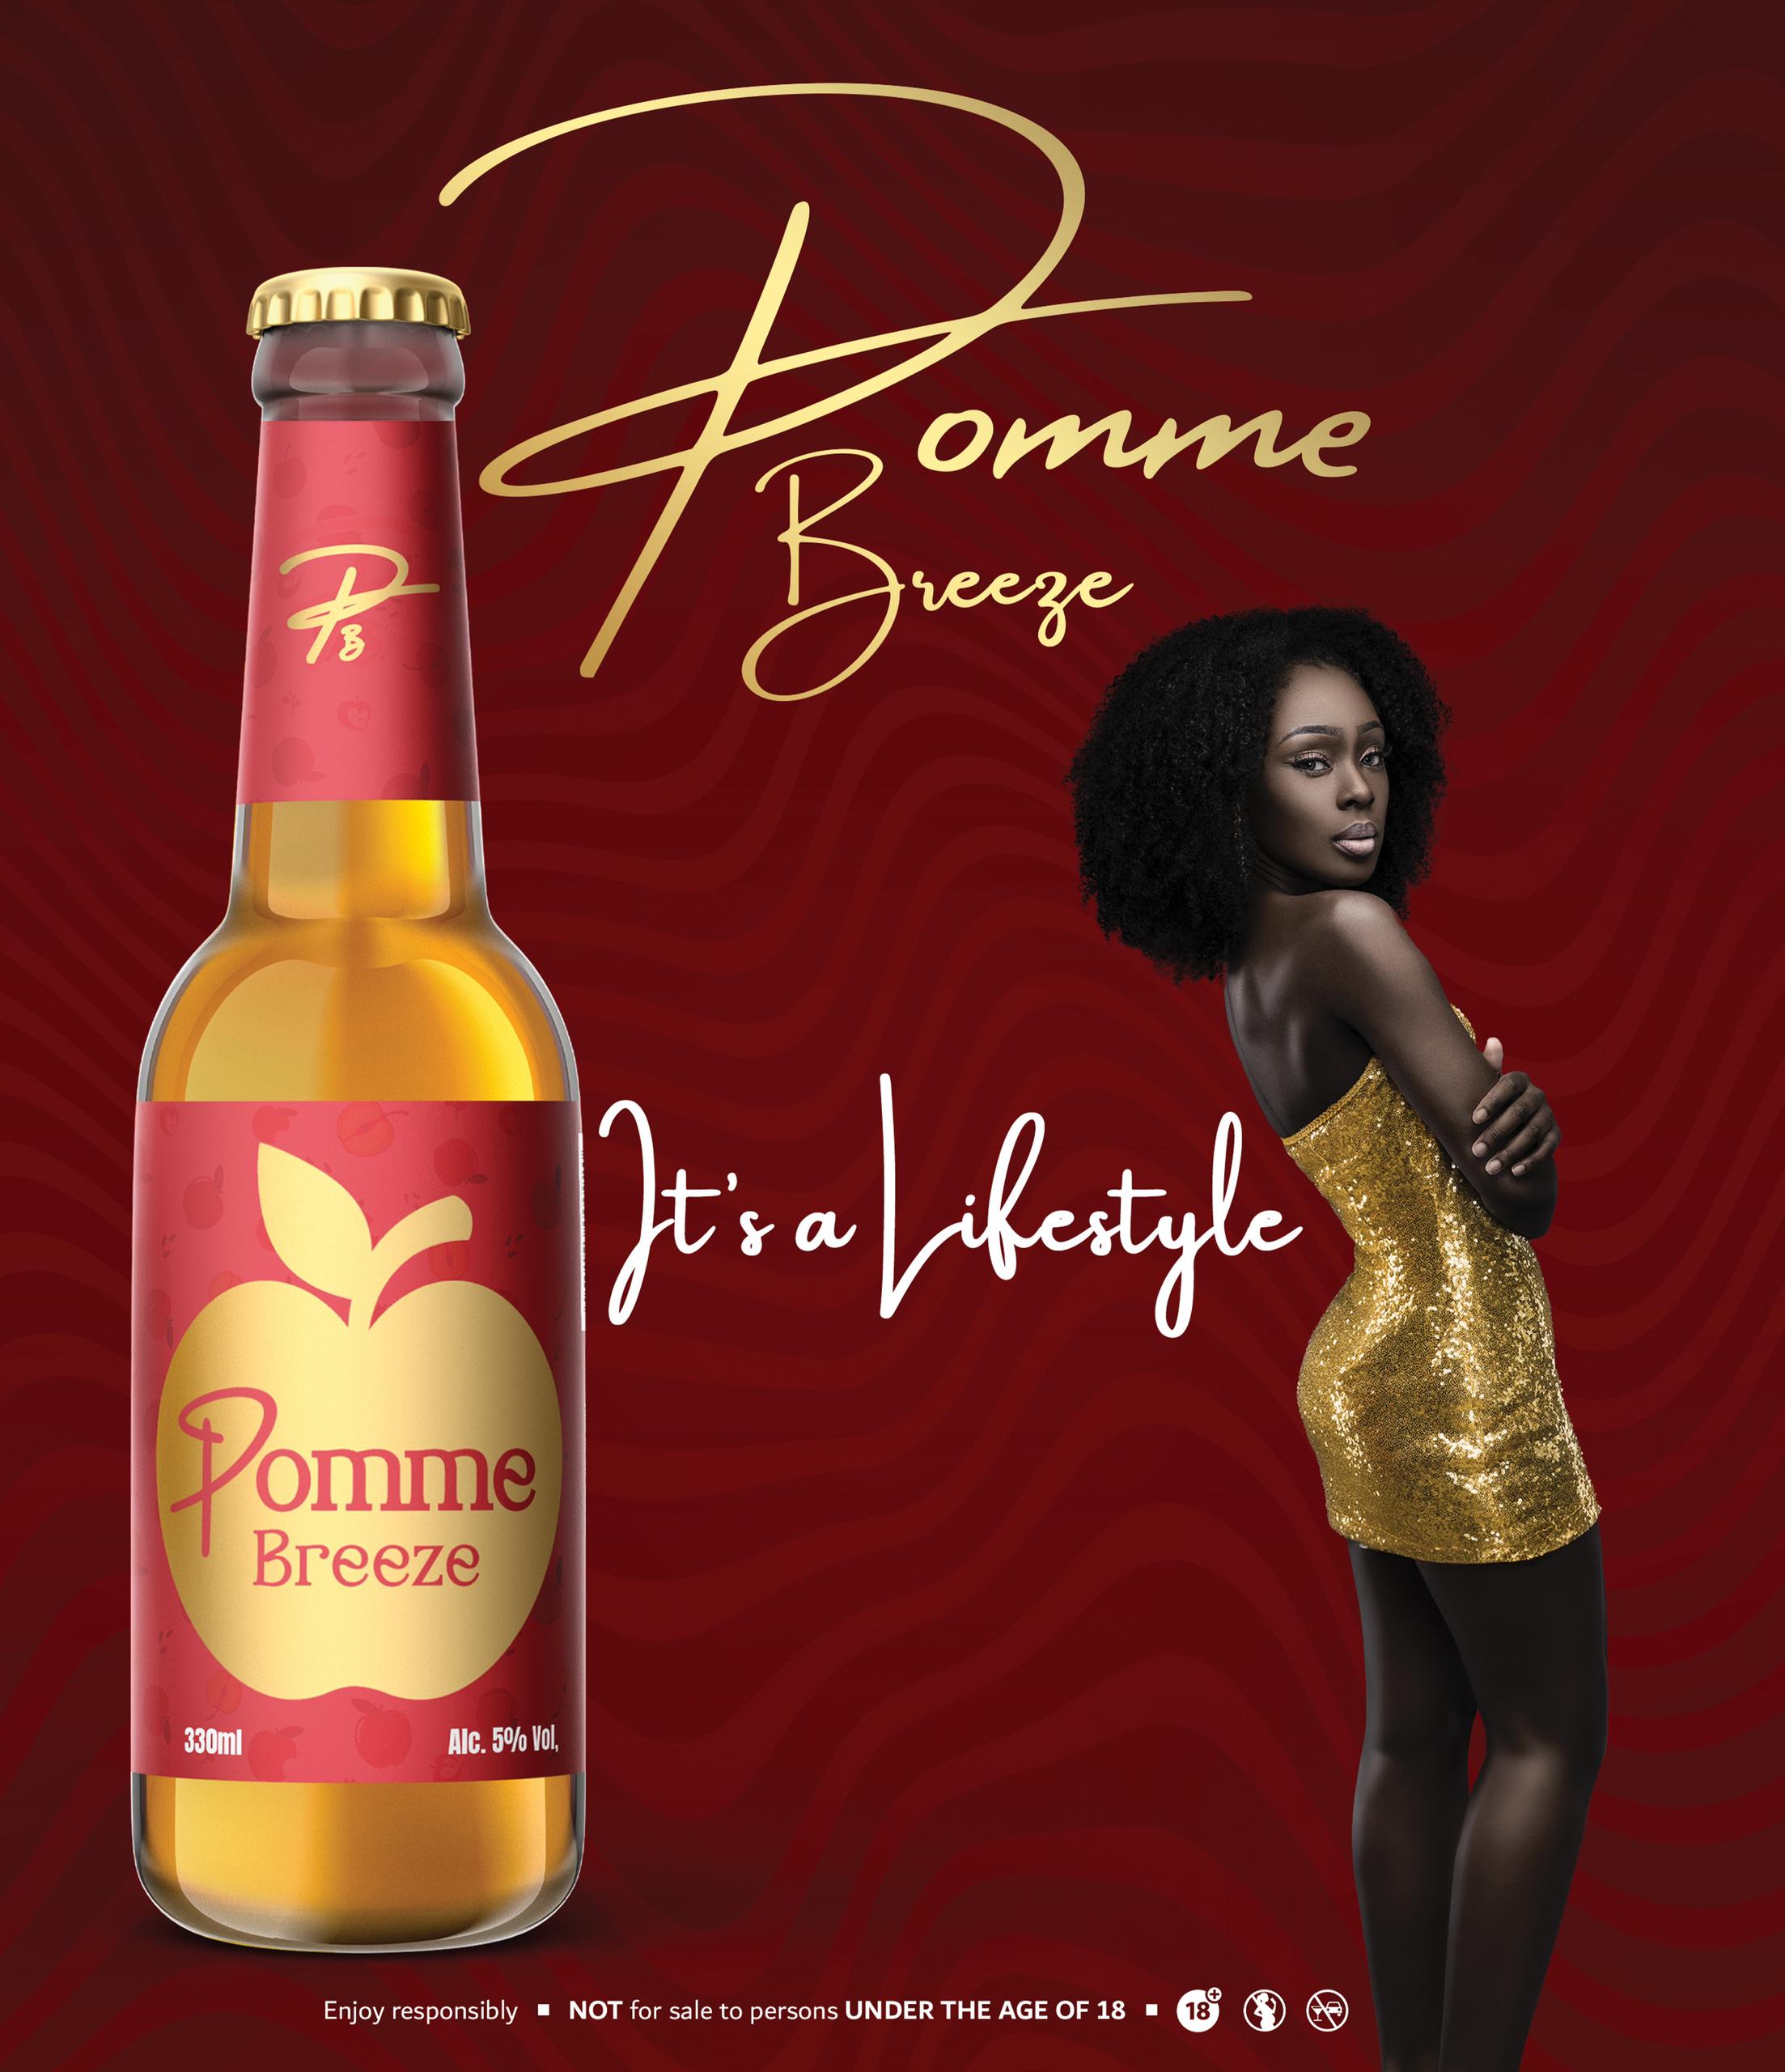 Unwind and relax with the Pomme Breeze l...